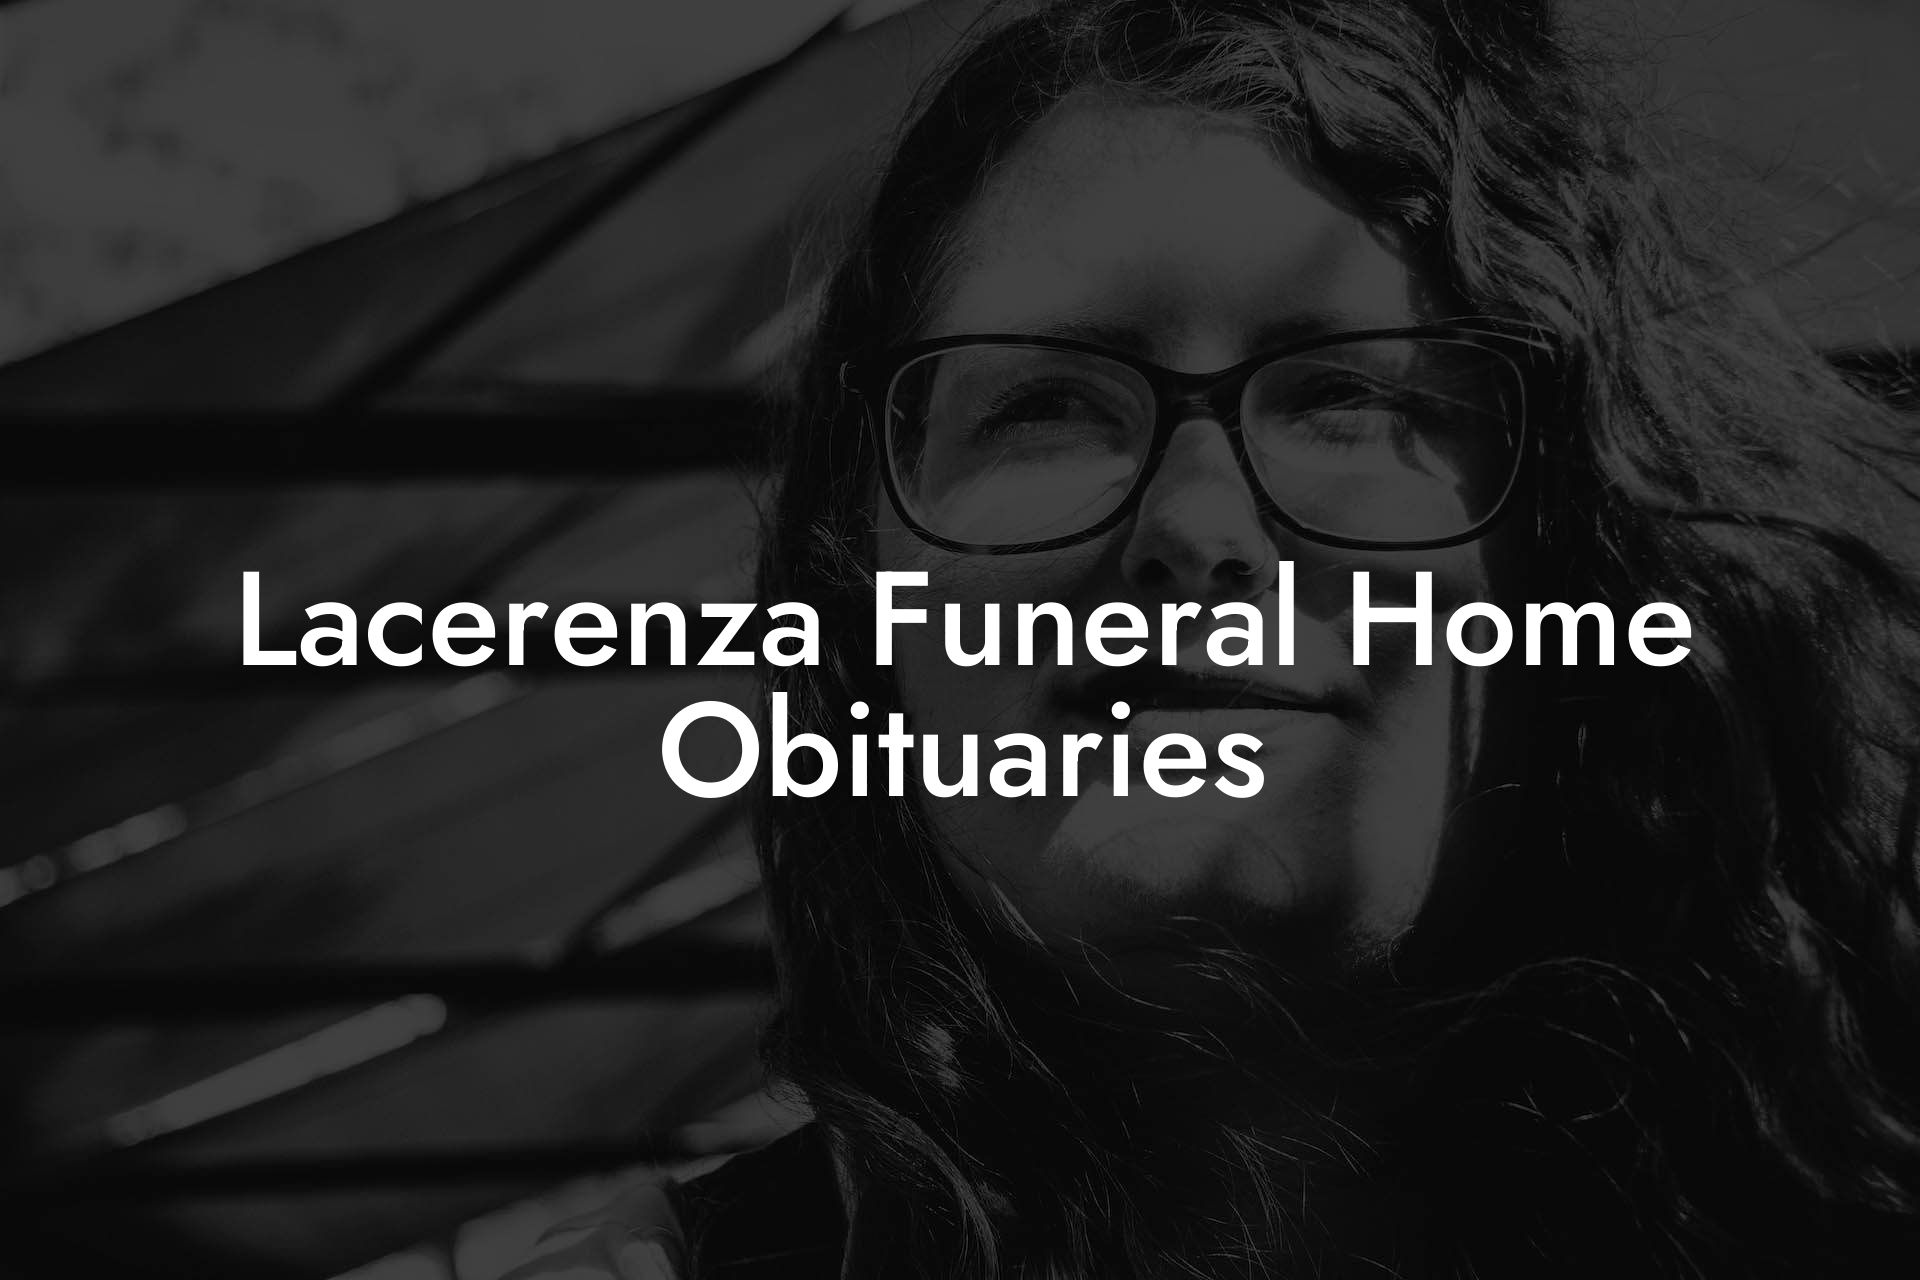 Lacerenza Funeral Home Obituaries